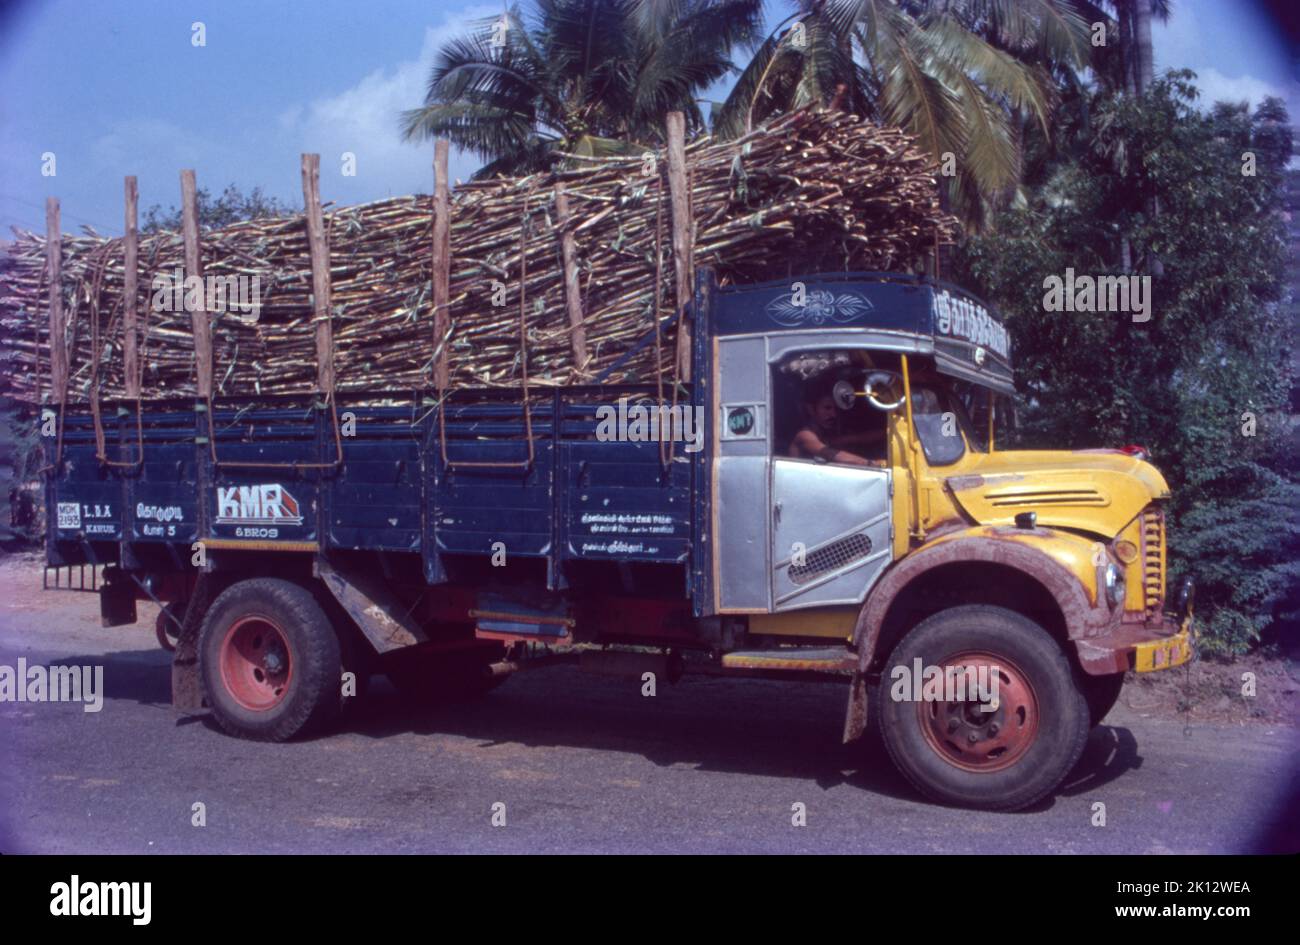 Truck Loaded with Sugarcane Crop Stock Photo